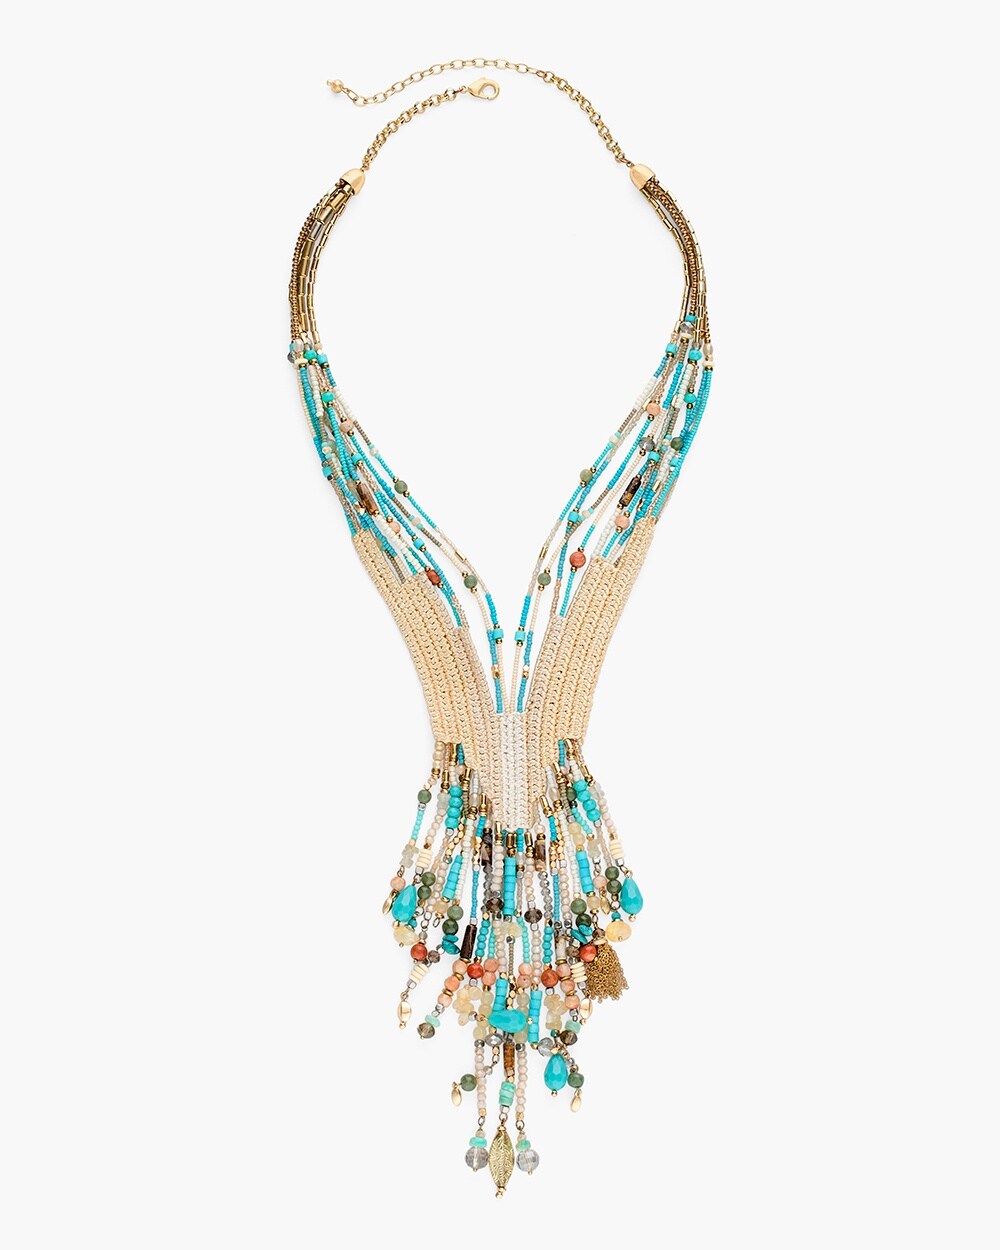 Multi-Colored Beaded Interrupter Necklace